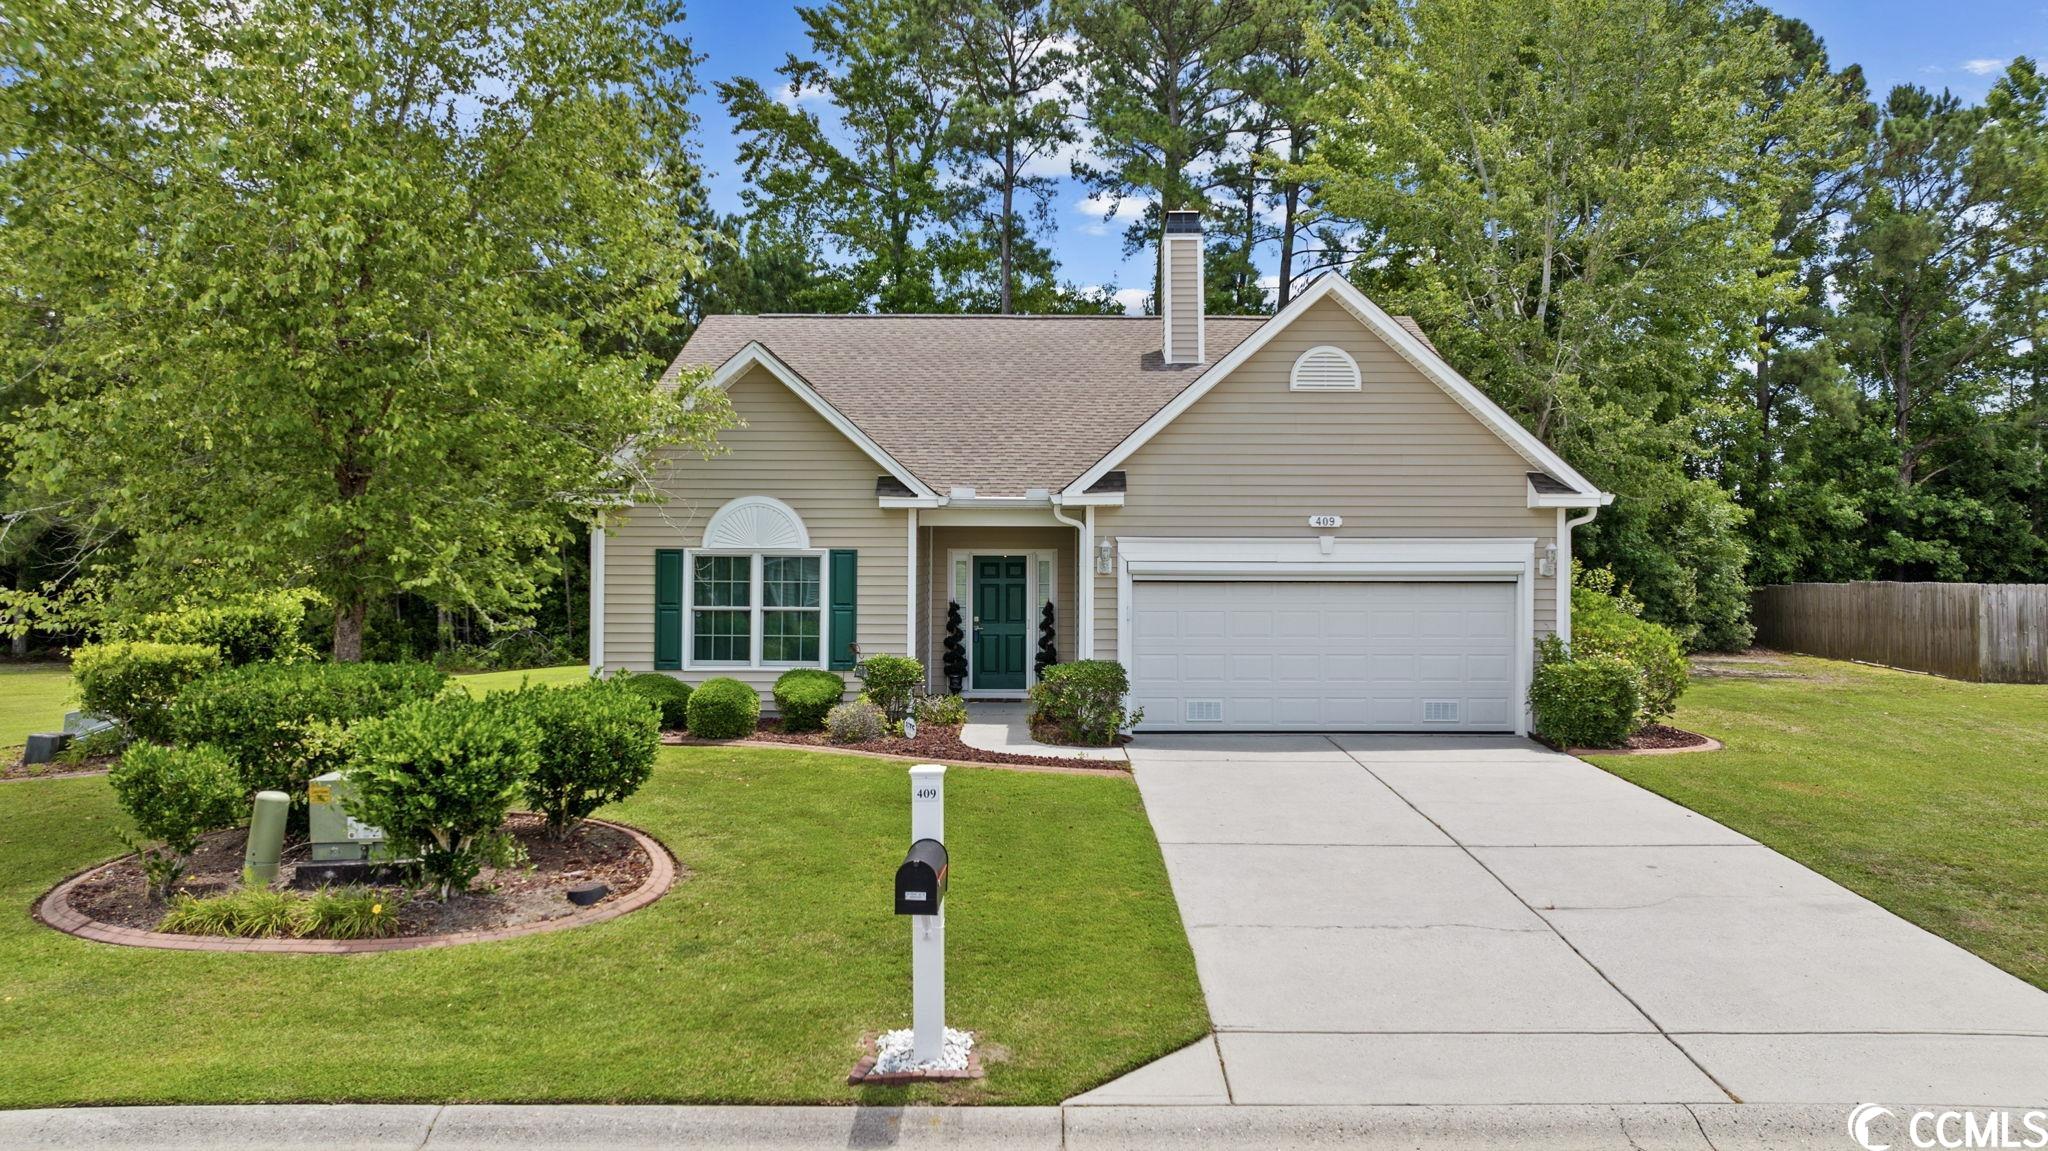 409 Carriage Lake Dr. Little River, SC 29566